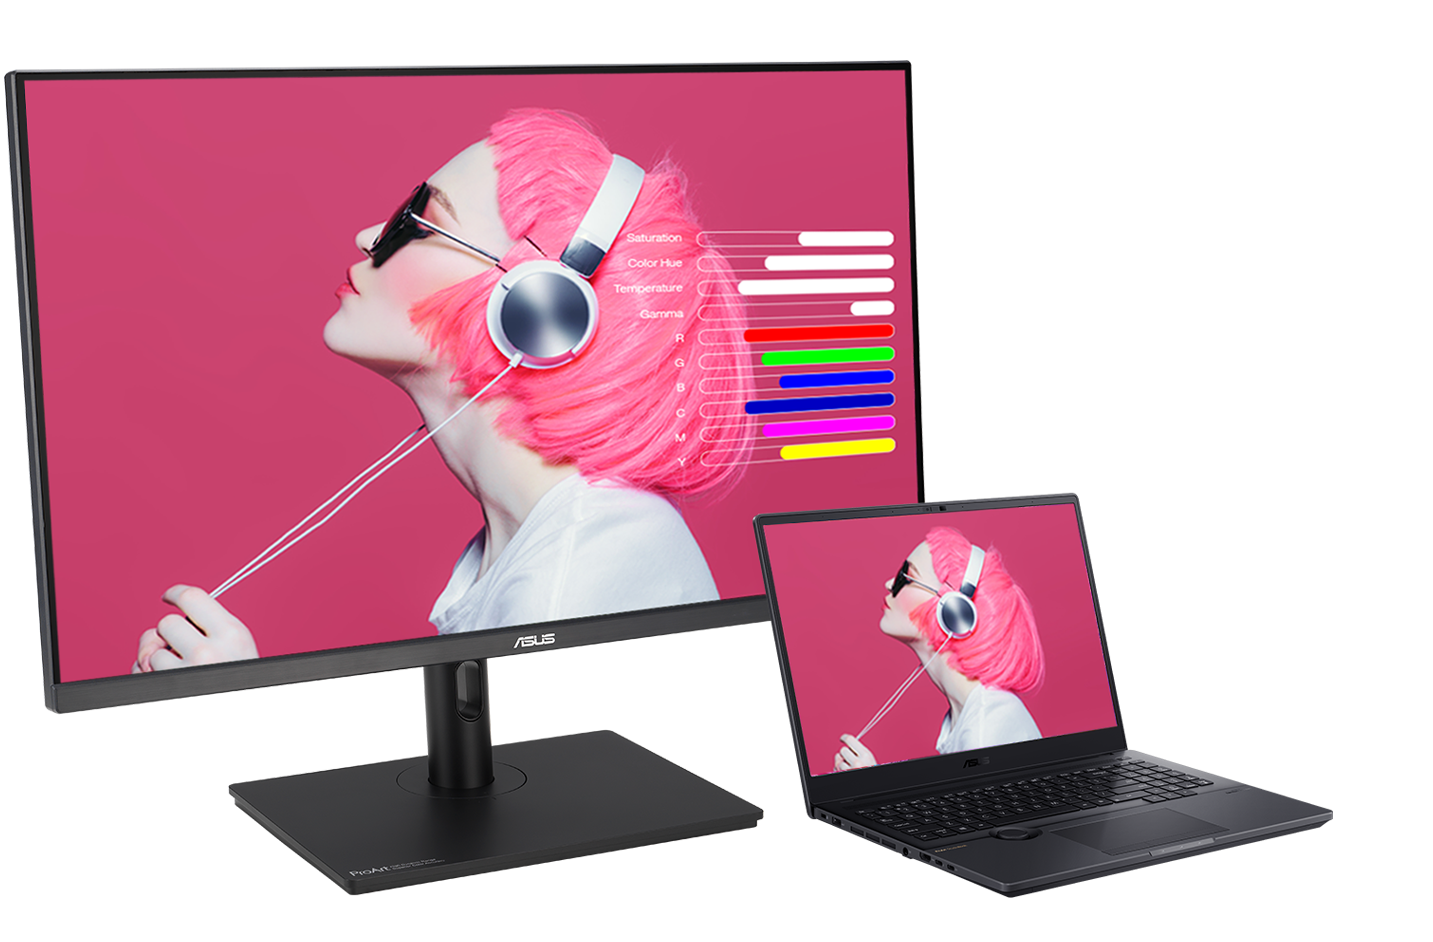 ProArt Display PA328QV provides personalized editing experience